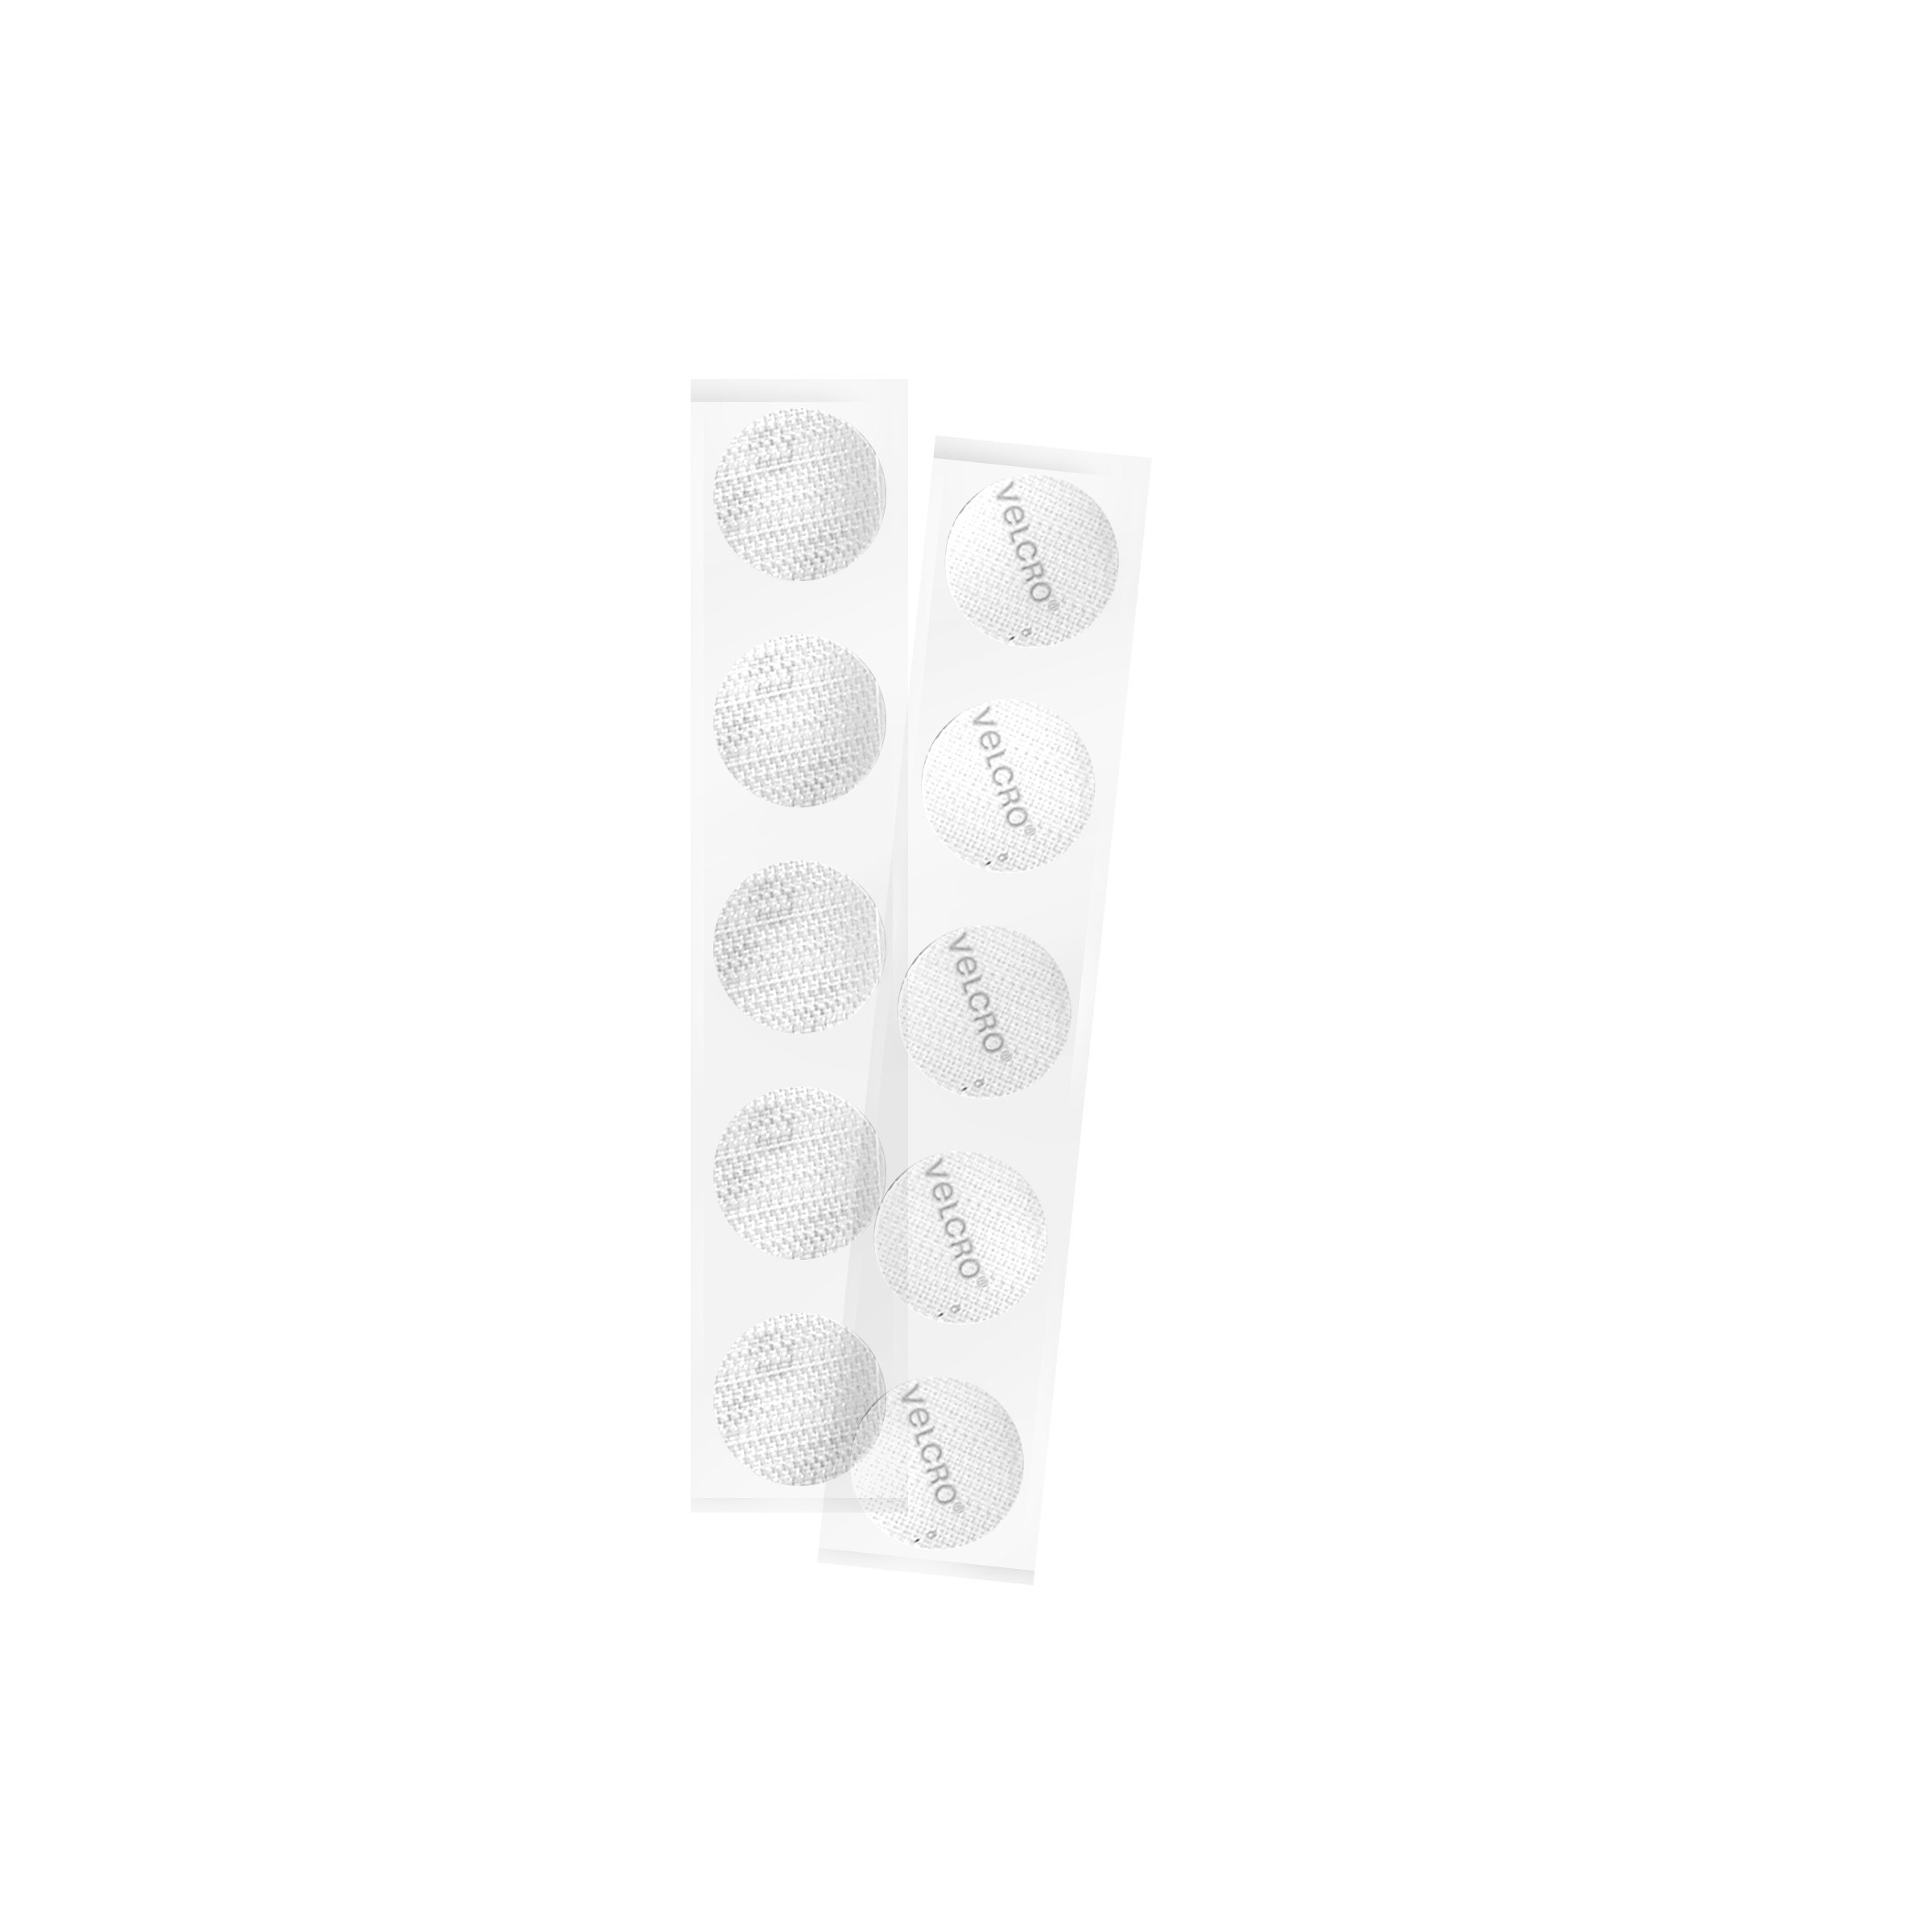 Velcro Hook Stickers for Sticking Medication to Back Panels